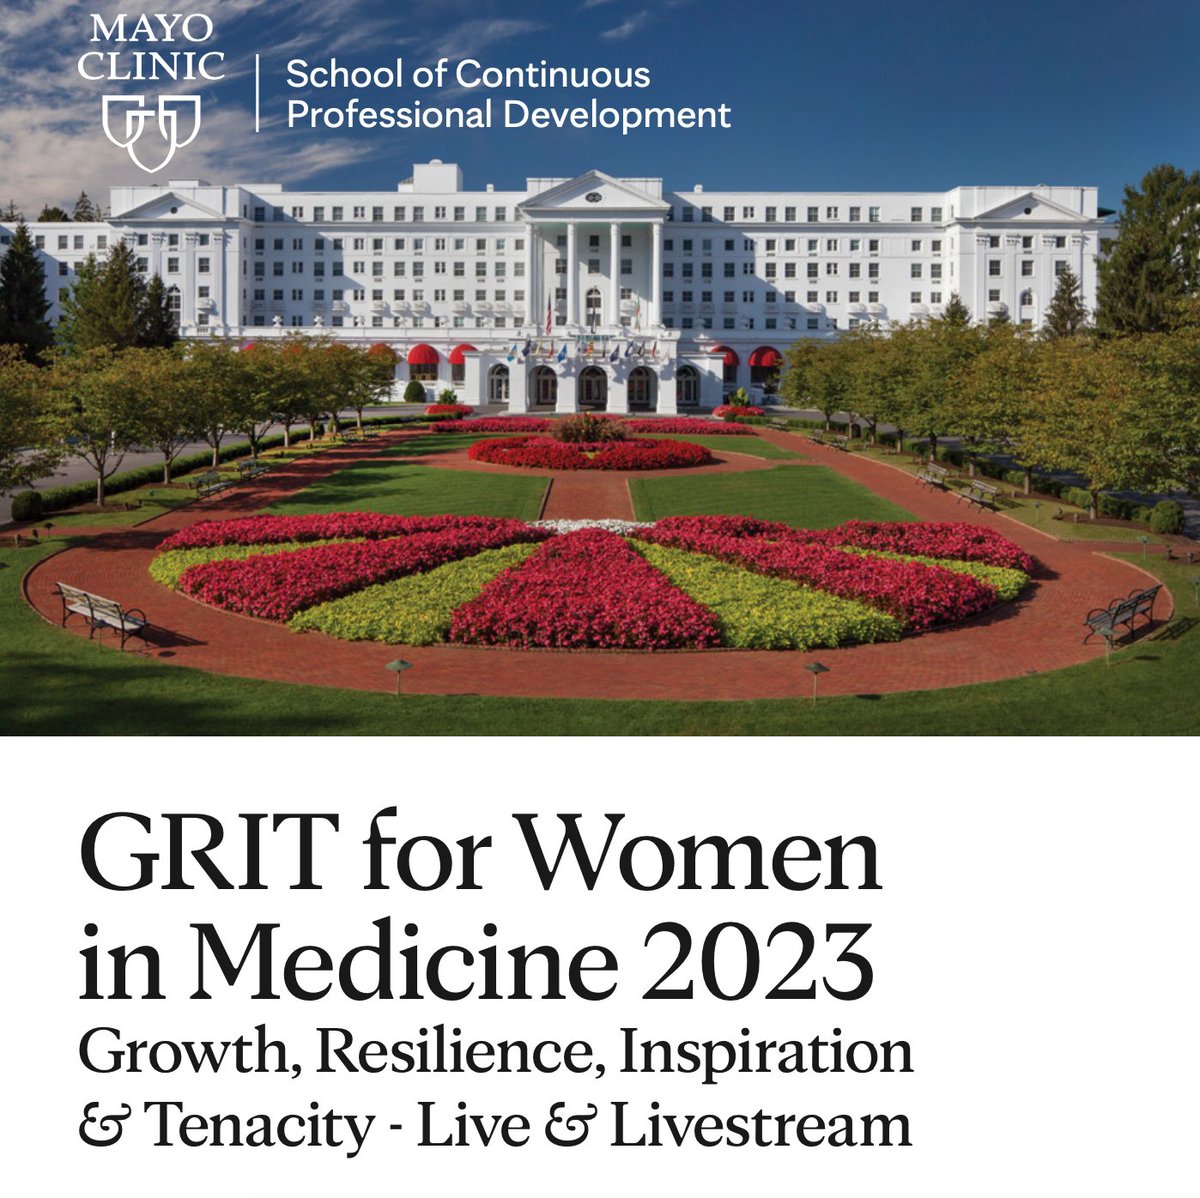 Incredibly excited for #MayoGRIT to begin this week! I'm ready to be inspired by the fantastic lineup of speakers and workshops! 🌄 @MayoGRIT @SMoeschlerMD @anjalibhagramd @AmyOxentenkoMD @BridgetPulos @MeghanACooperDO 👩‍⚕️ Learn more: ce.mayo.edu/special-topics…